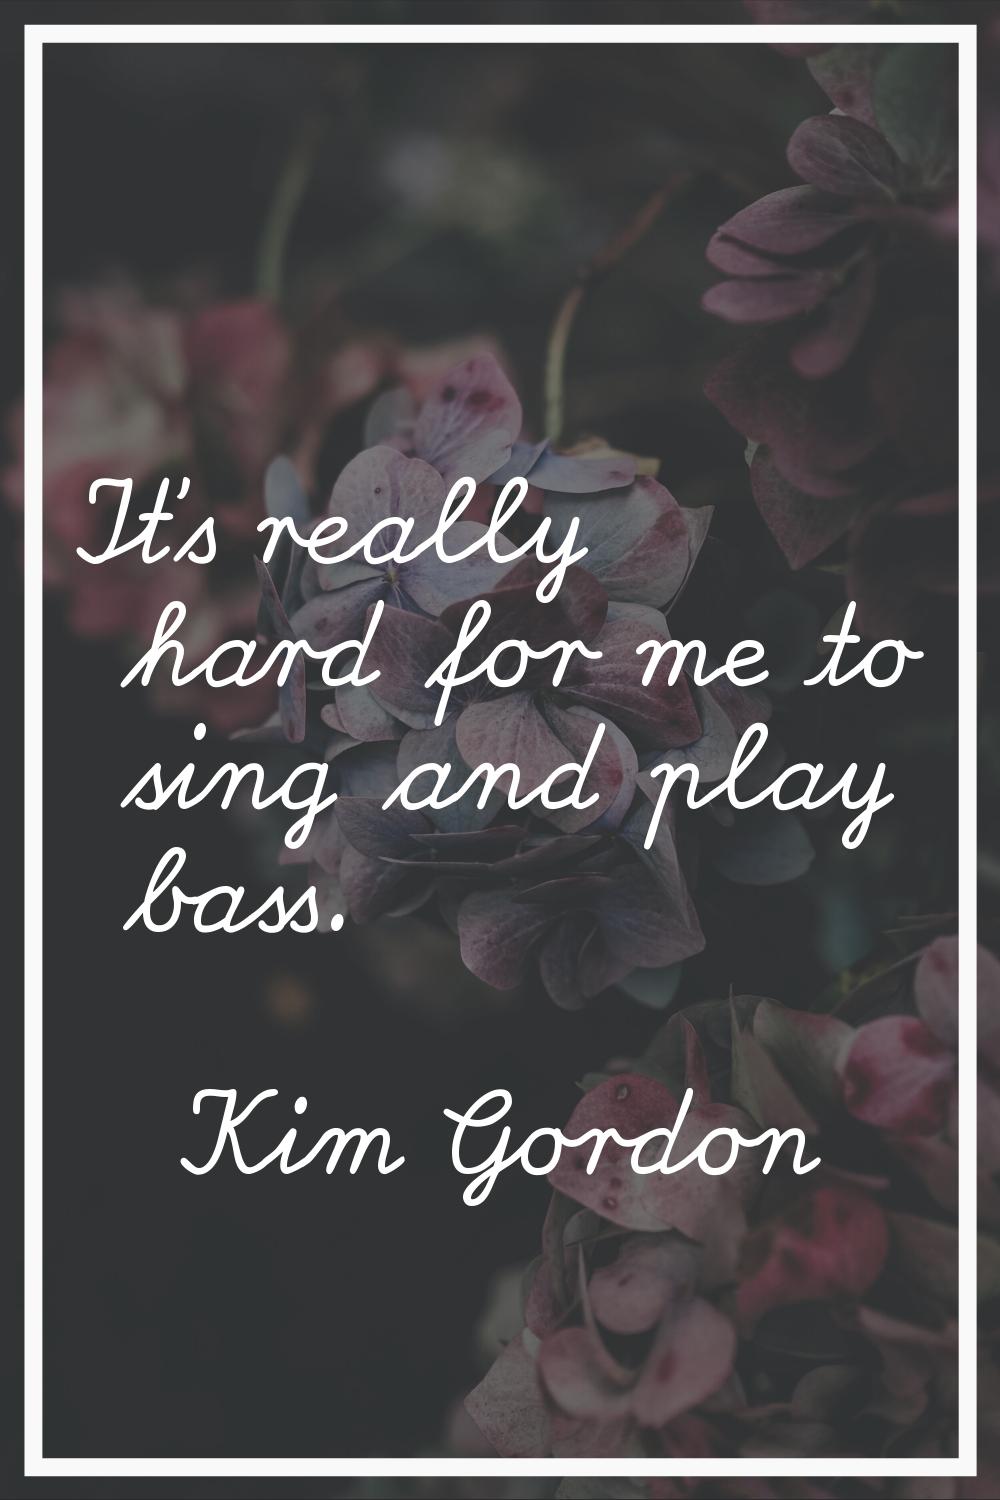 It's really hard for me to sing and play bass.